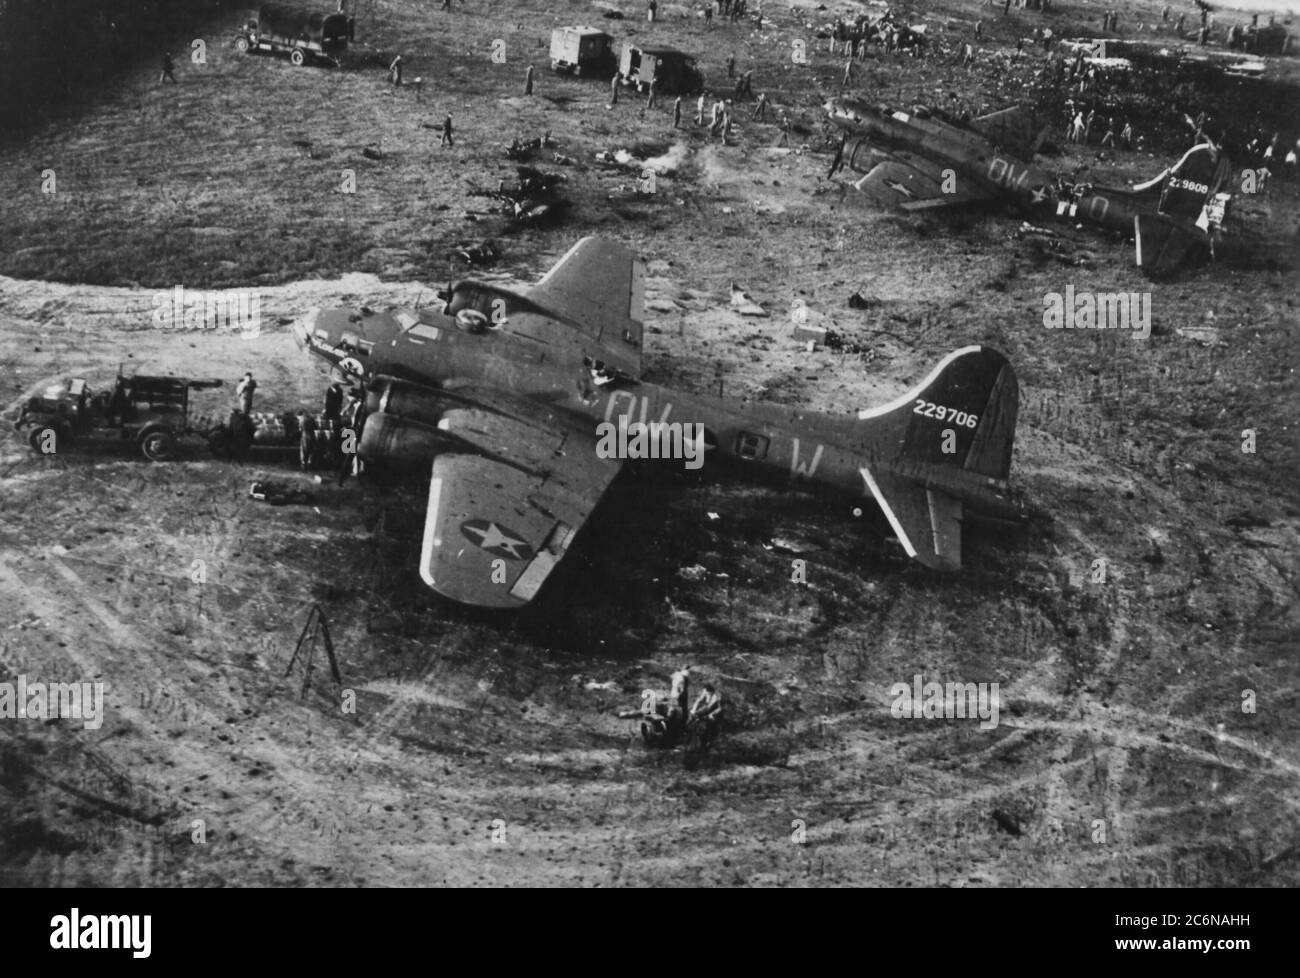 Two of the B-17 Flying Fortresses that were damaged by an explosion at RAF Alconbury May 27, 1943, sit on the flightline. Nineteen U.S. Army Air Force 95th Bombardment Group airmen were killed and 21 others were injured when a 500-pound bomb detonated on the flightline. A memorial plaque was placed in their honor at Alconbury Airfield May 27, 2013. Stock Photo